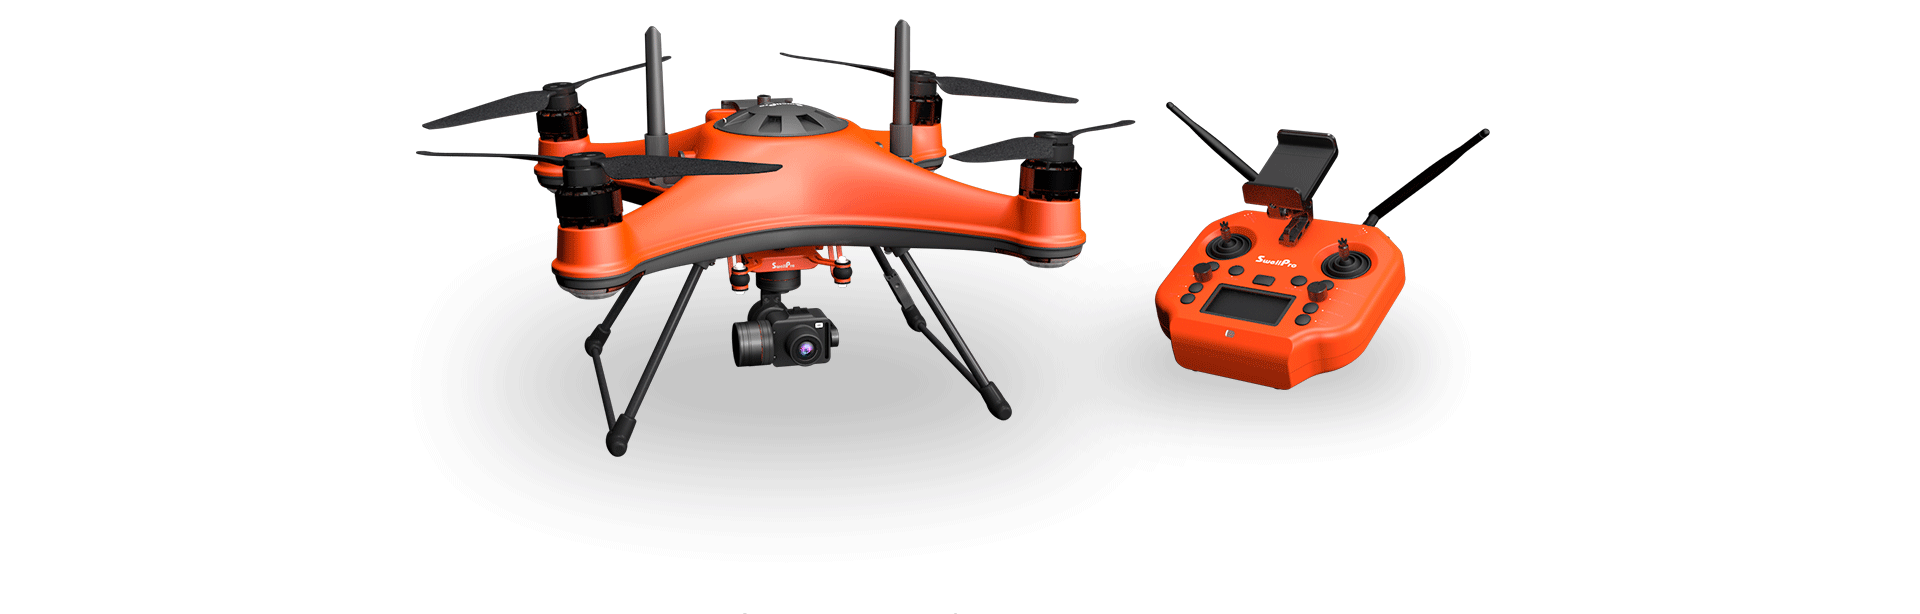 Swellpro Splash Drone, GC3-S weighs 735 g (5 g) and can